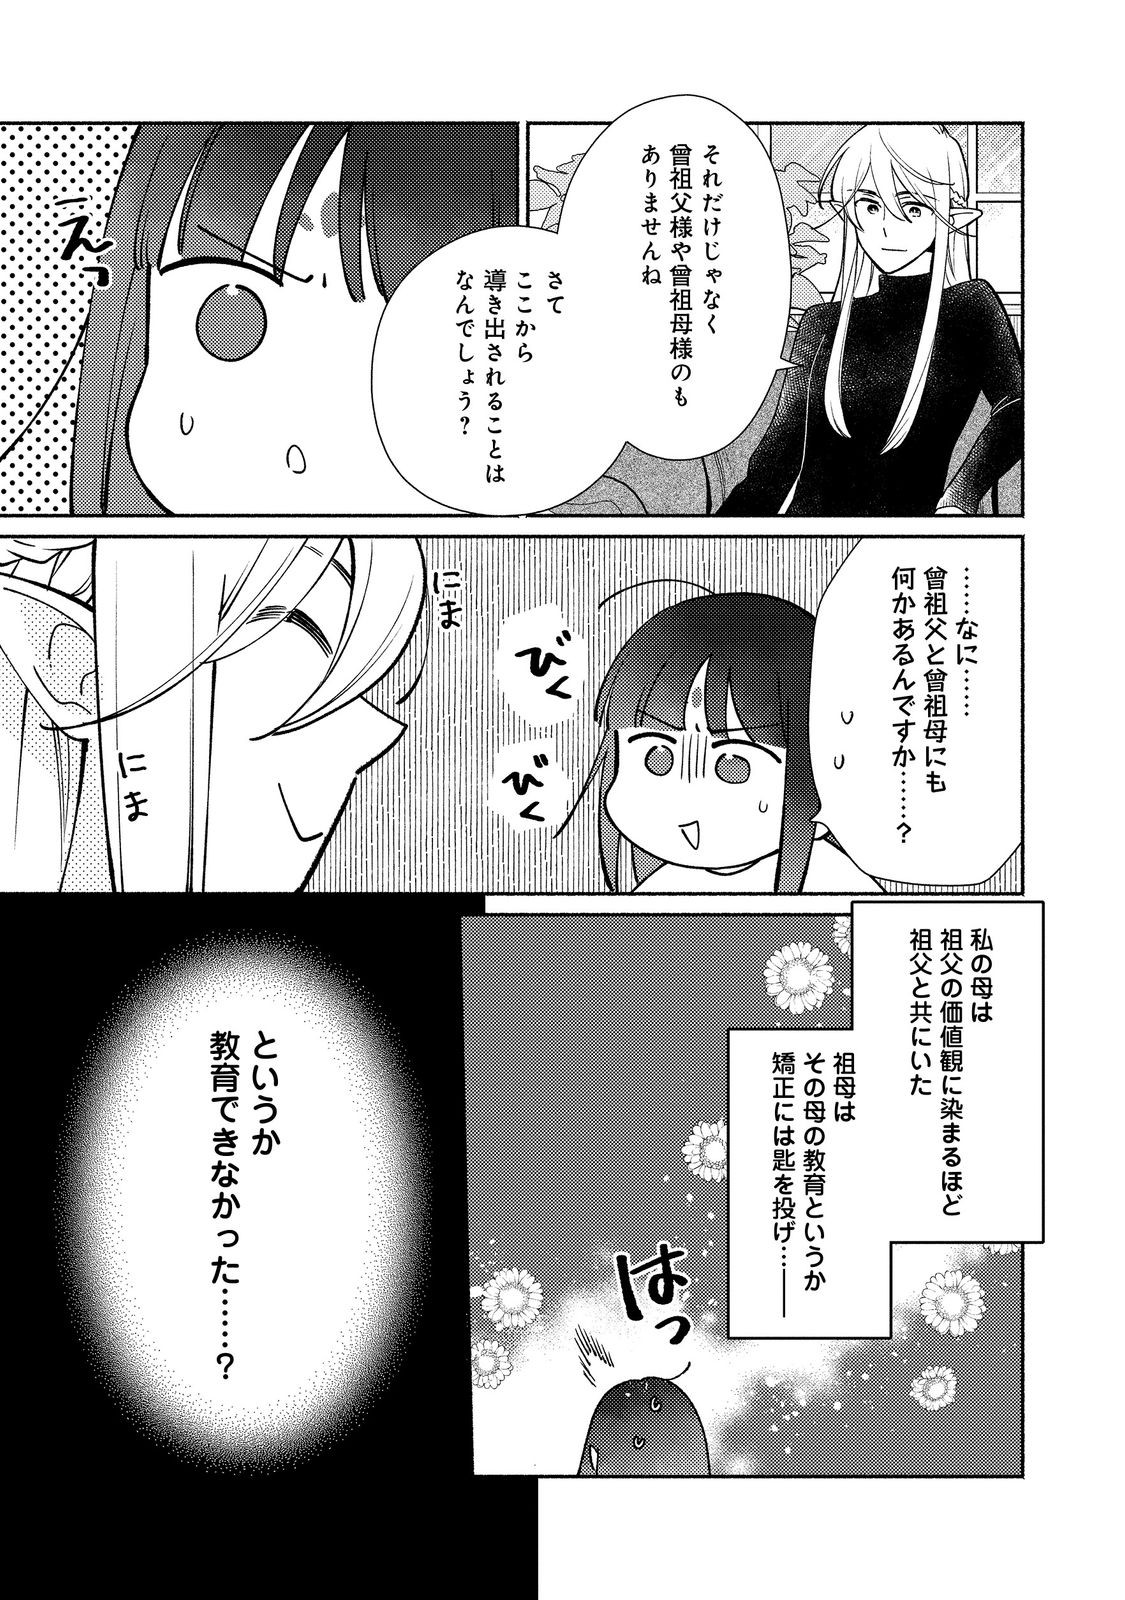 I’m the White Pig Nobleman 第25.1話 - Page 7